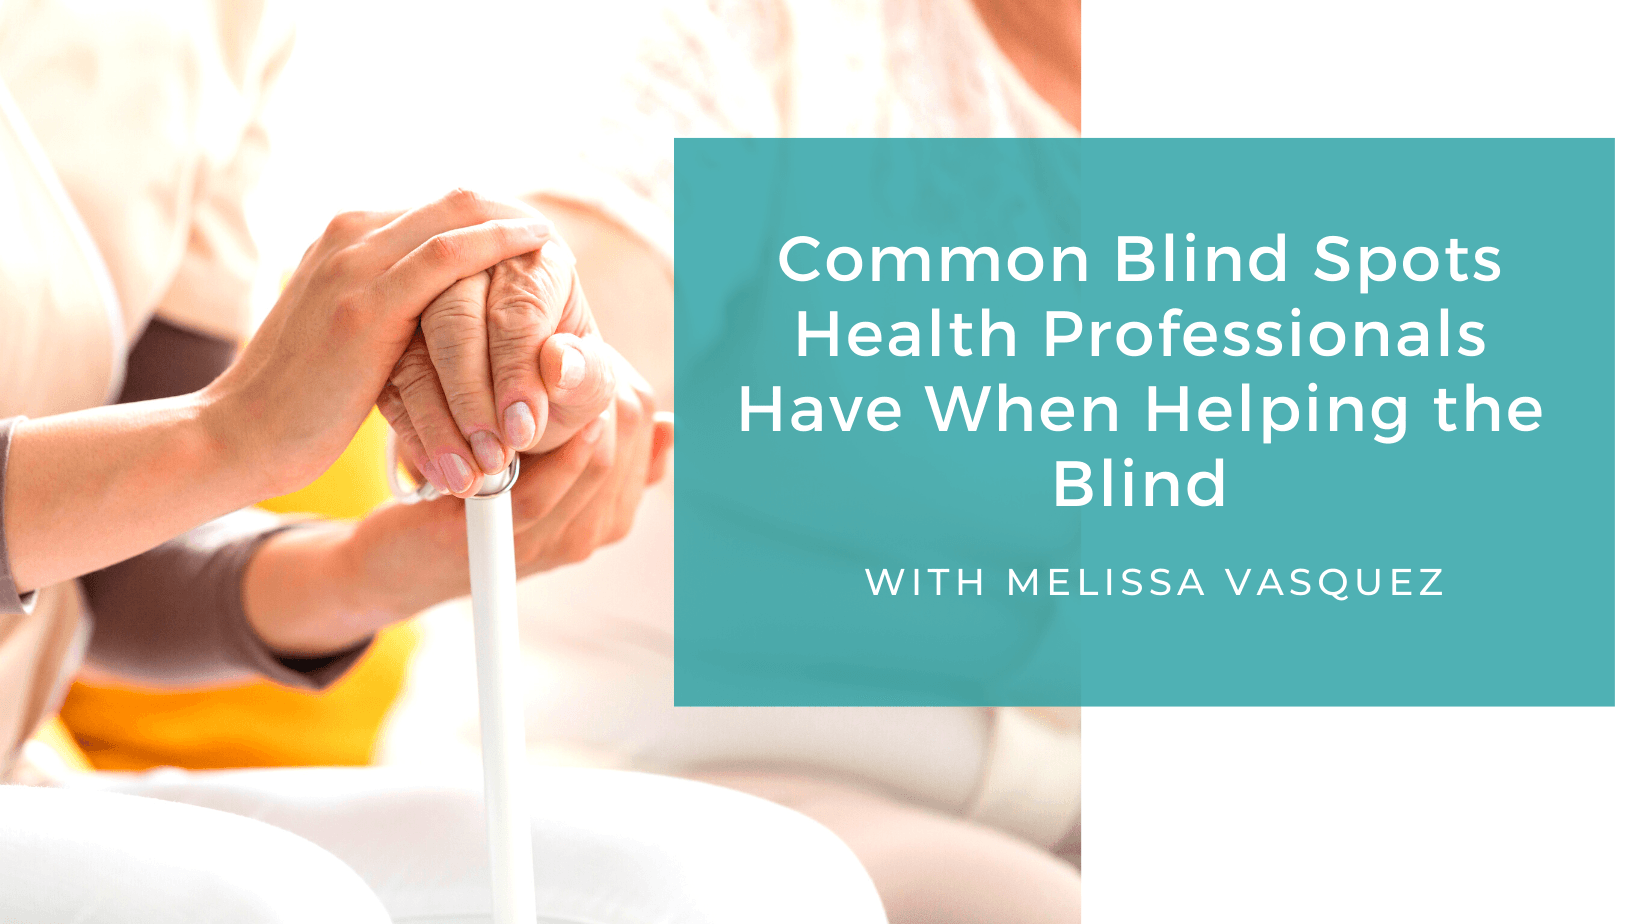 Common Blind Spots Health Professionals Have When Helping the Blind 